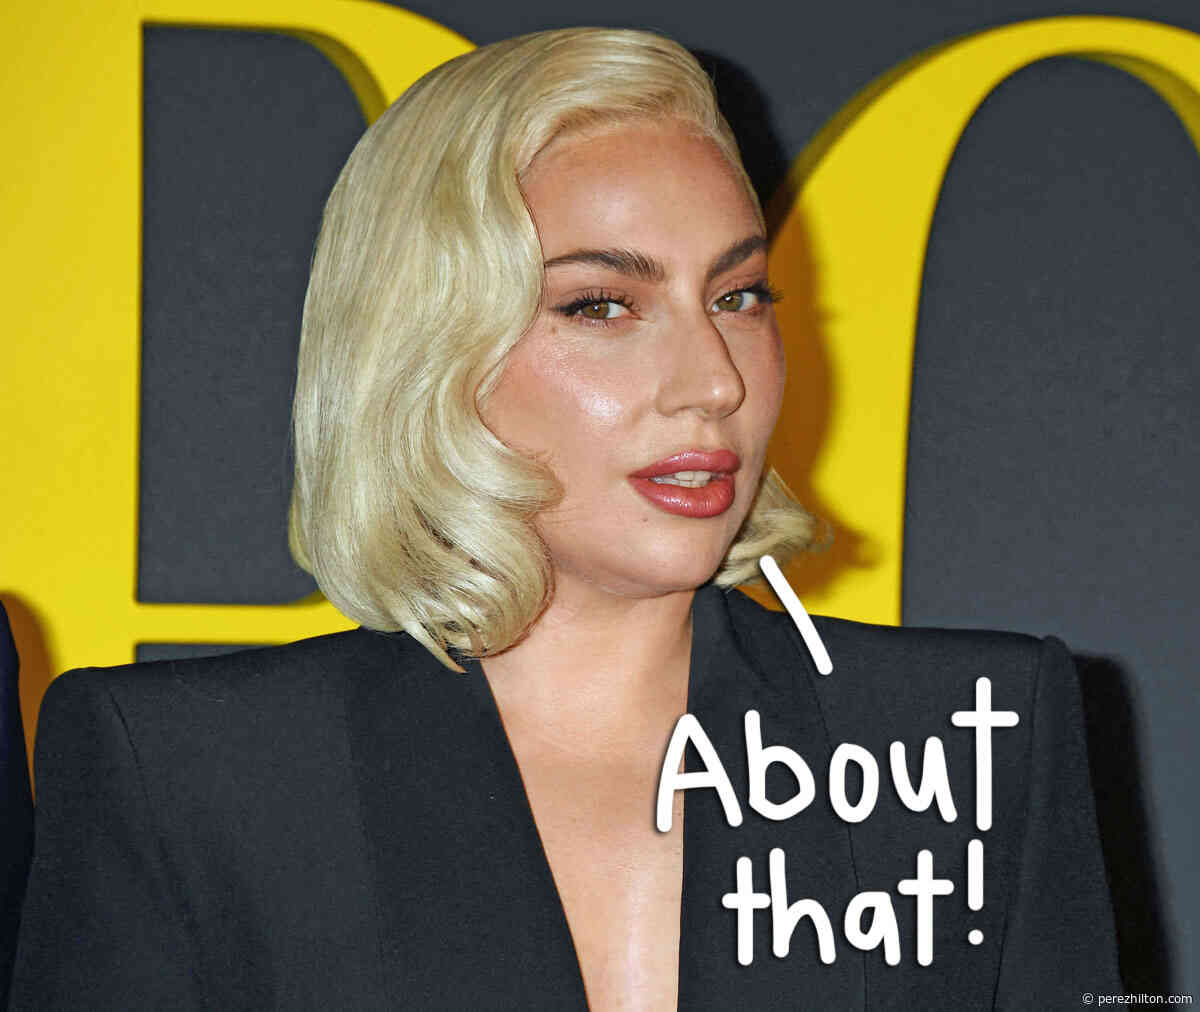 Lady GaGa Addresses Pregnancy Rumors After Photos From Sister's Wedding Spark Speculation!